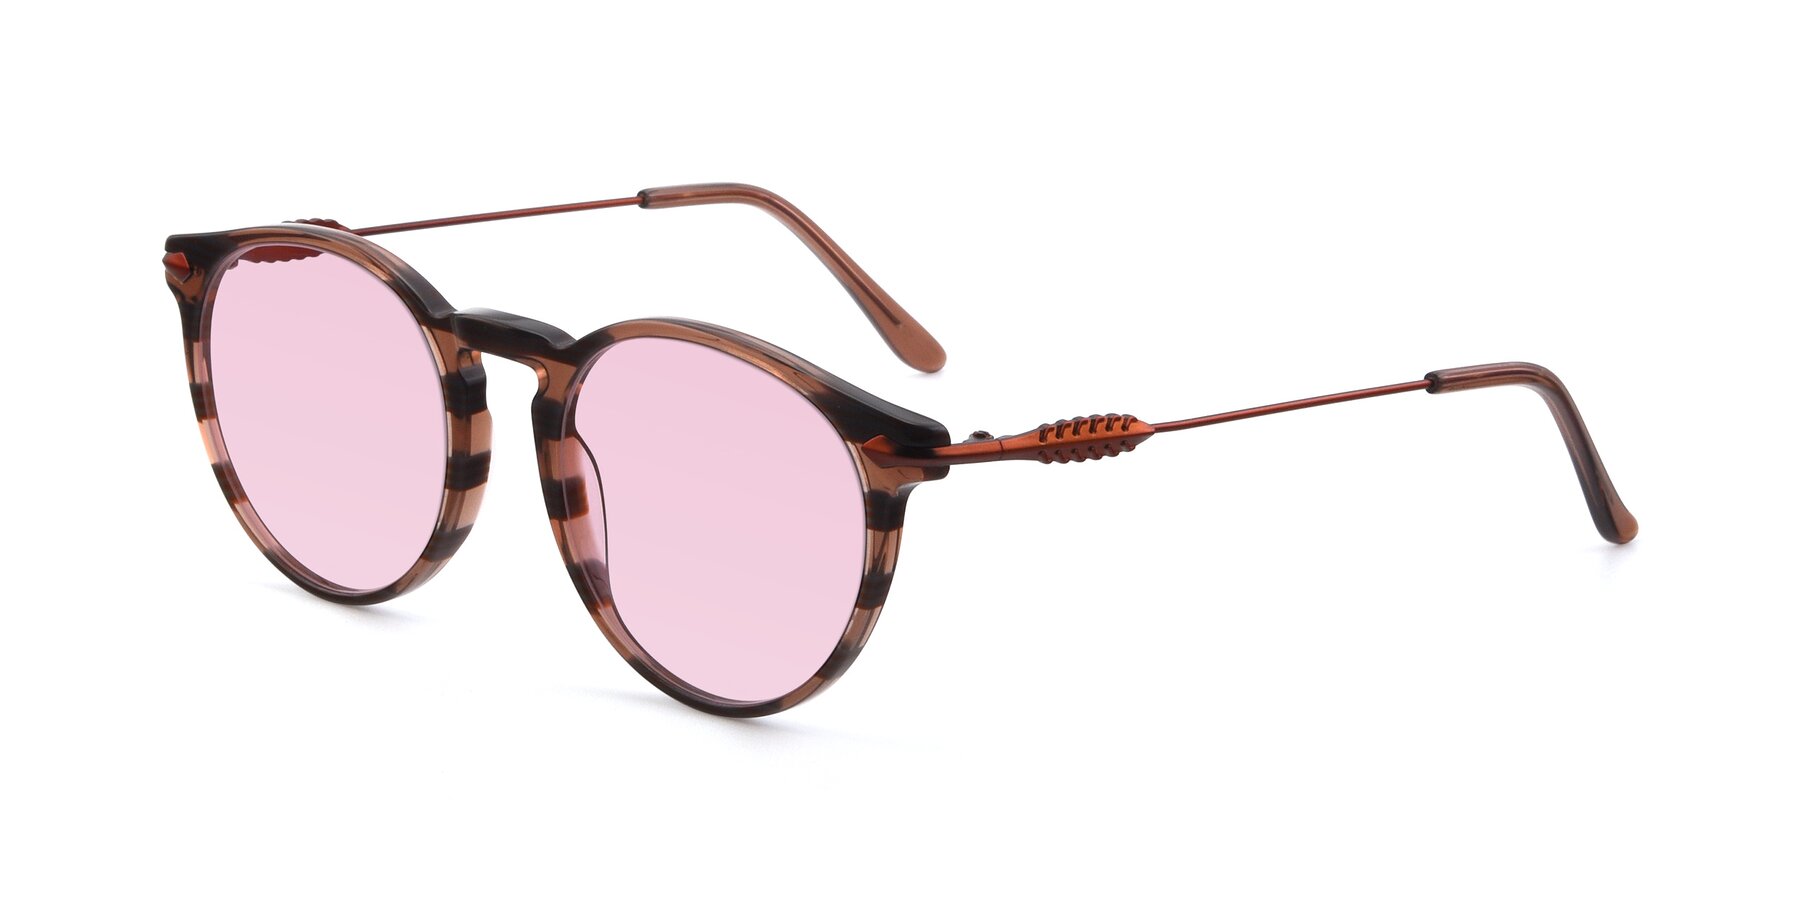 Angle of 17660 in Stripe Brown with Light Pink Tinted Lenses